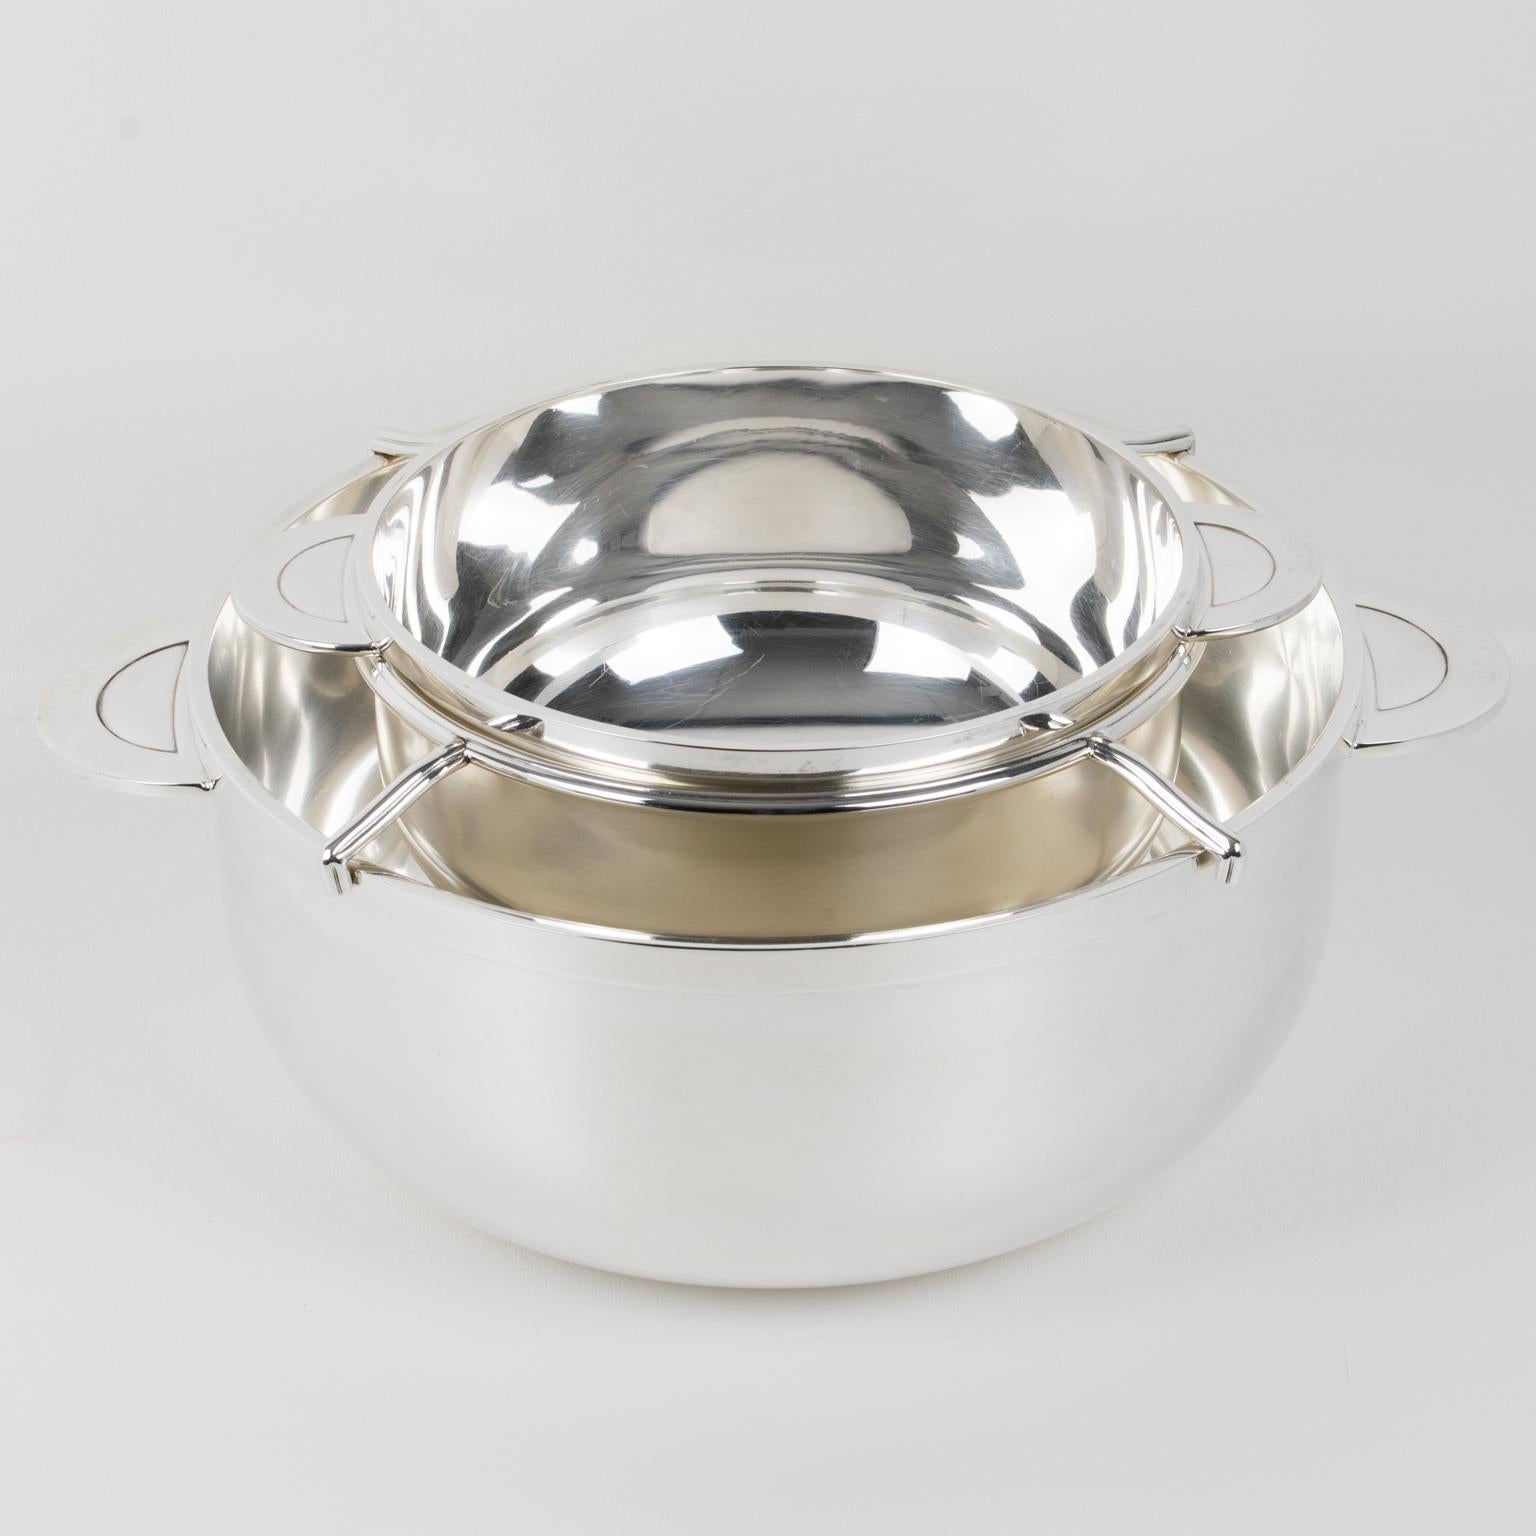 This stylish French Art Deco silver plate caviar serving bowl, dish, or chiller was designed by silversmith Christofle in the 1940s. 
This set features a two-handled rounded outer ice bowl container decorated with a minimalist chic design and a